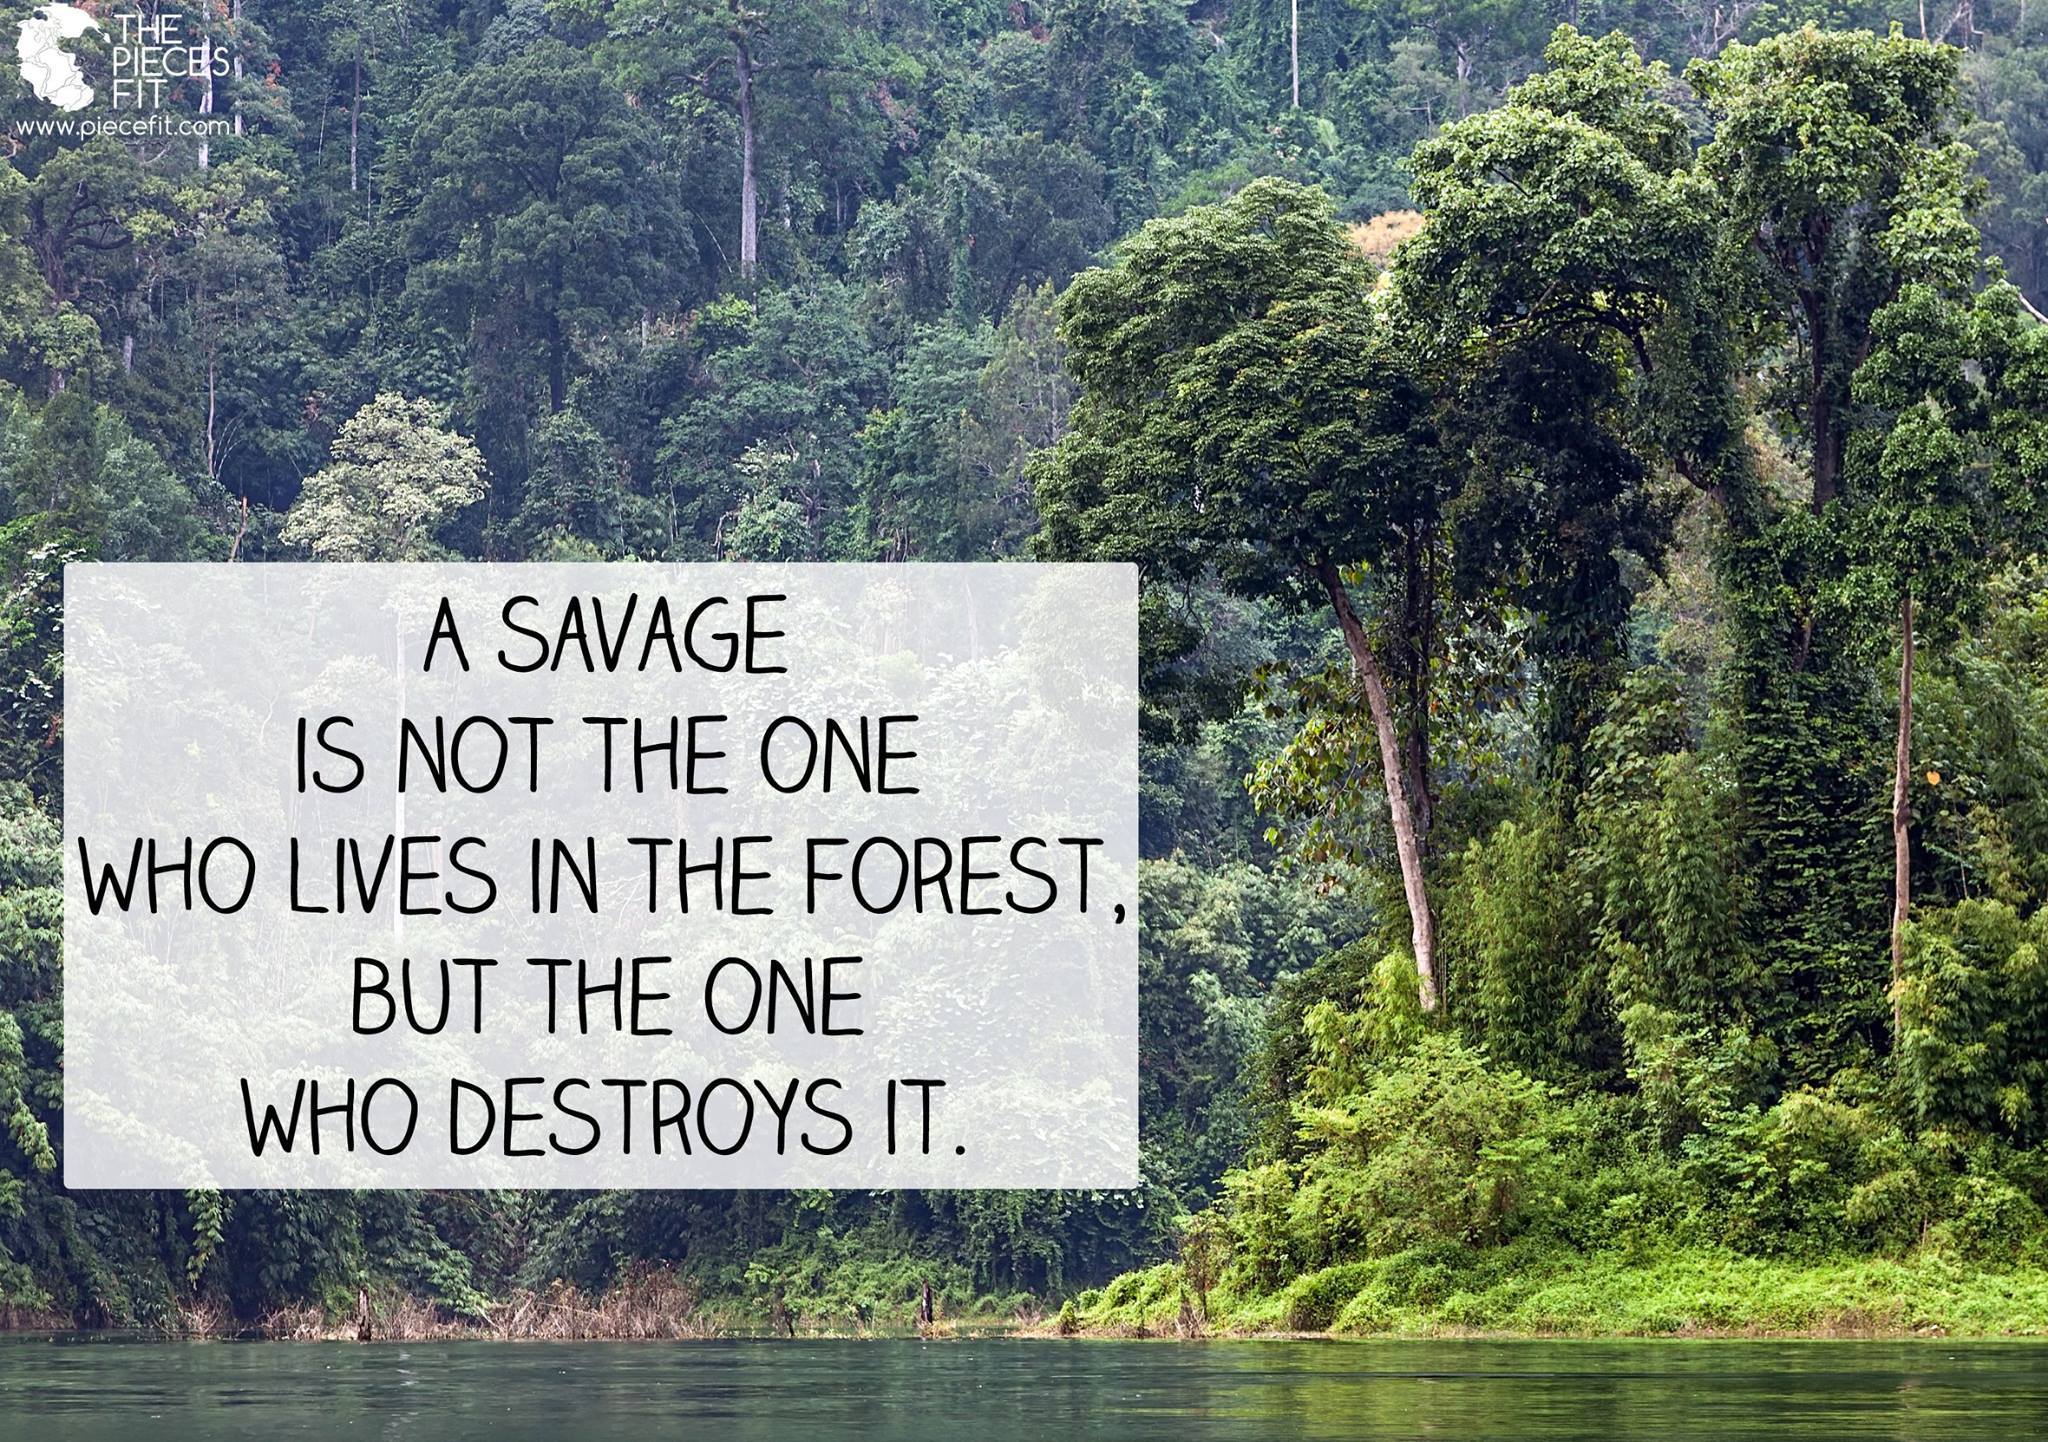 a savage is not the one who lives in the forest but the one who destroys it